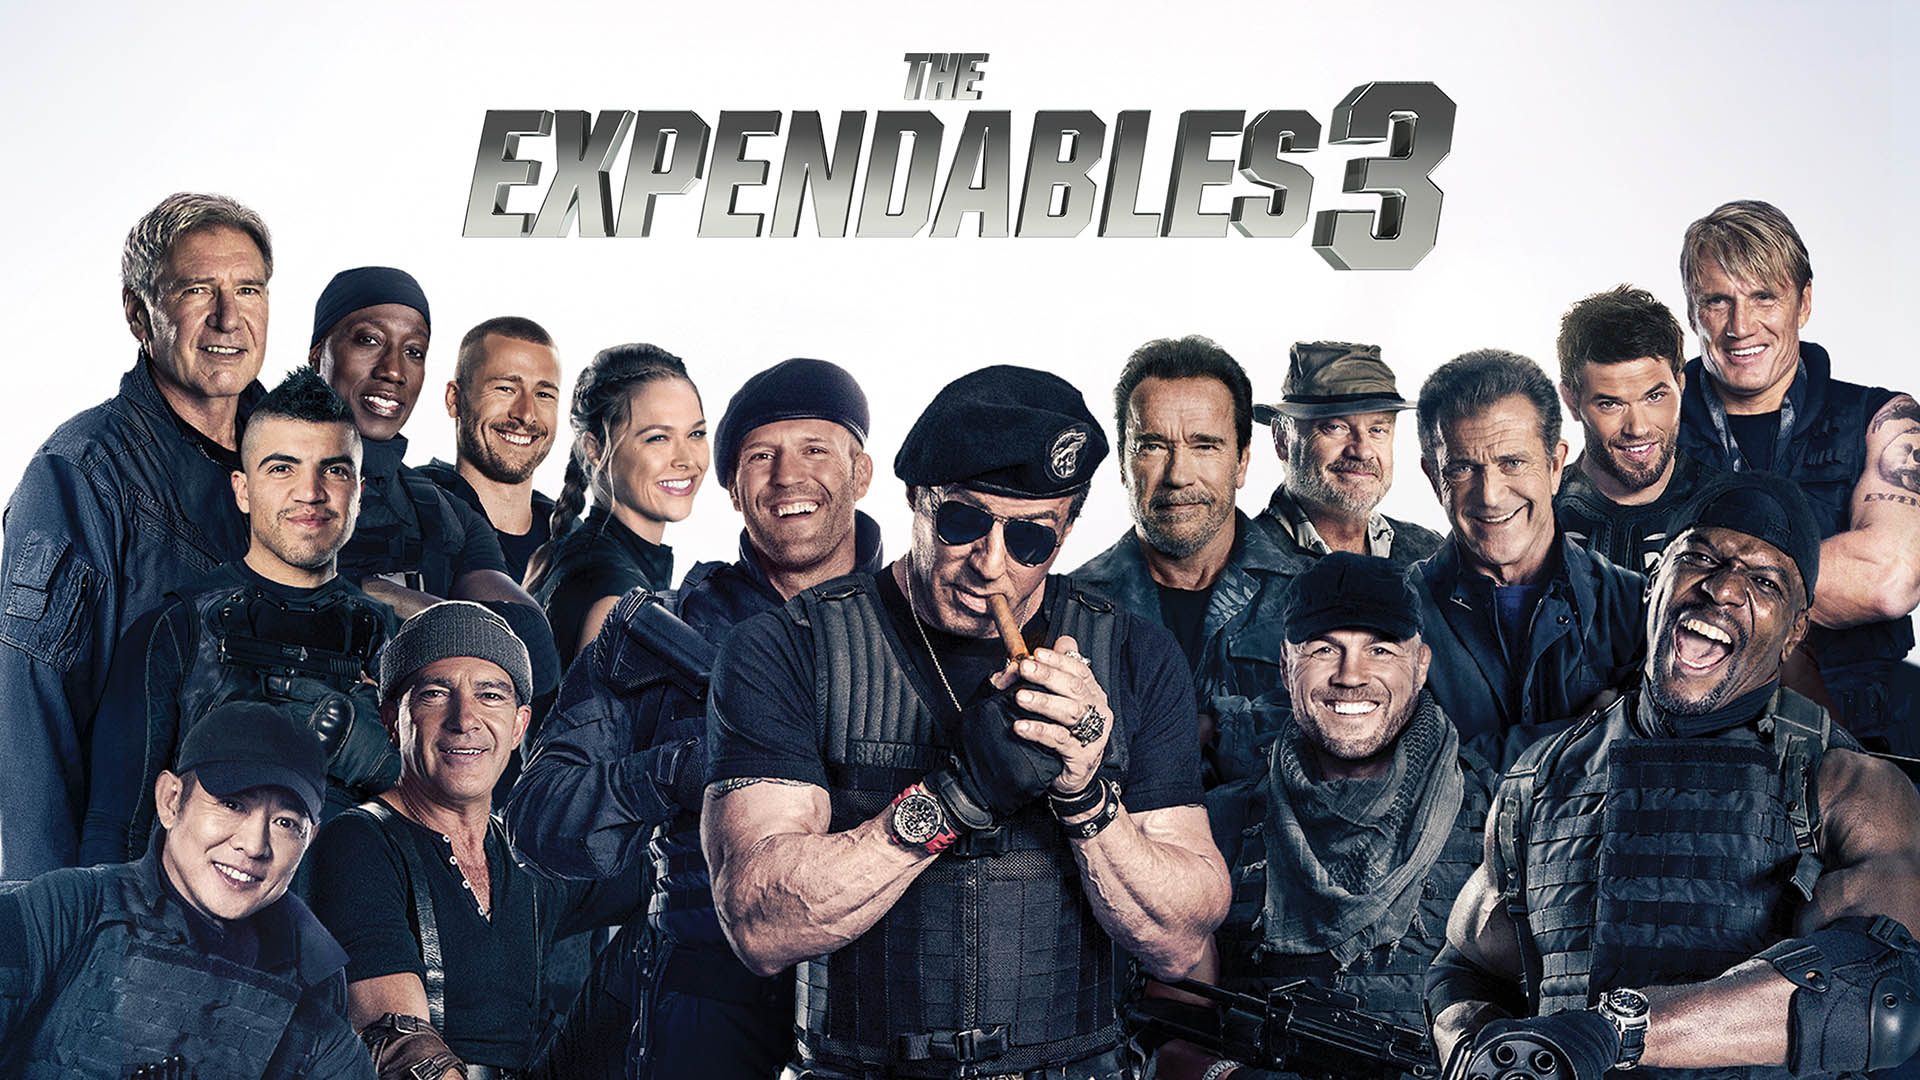 Watch The Expendables 3 Online | Stream Full Movies